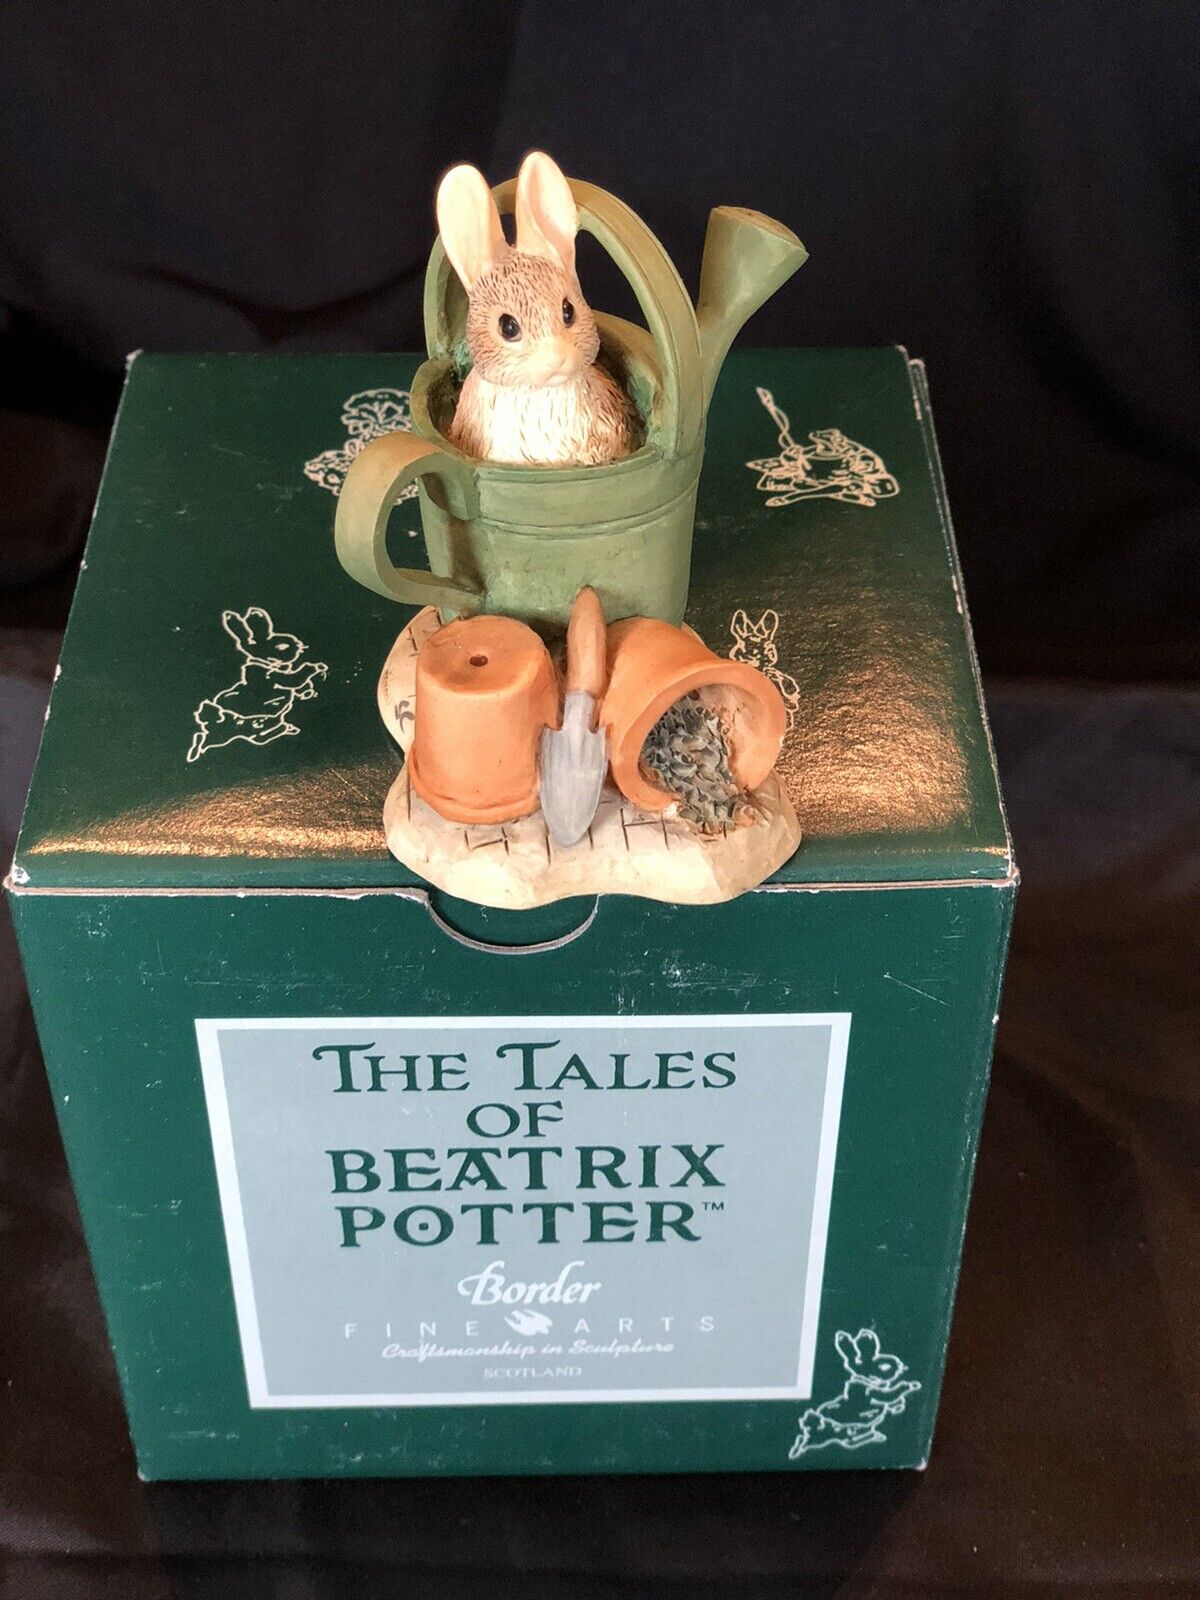 Vtg. Beatrix Potter Scotland Figurine Peter Rabbit in Watering Can 1993 with Box